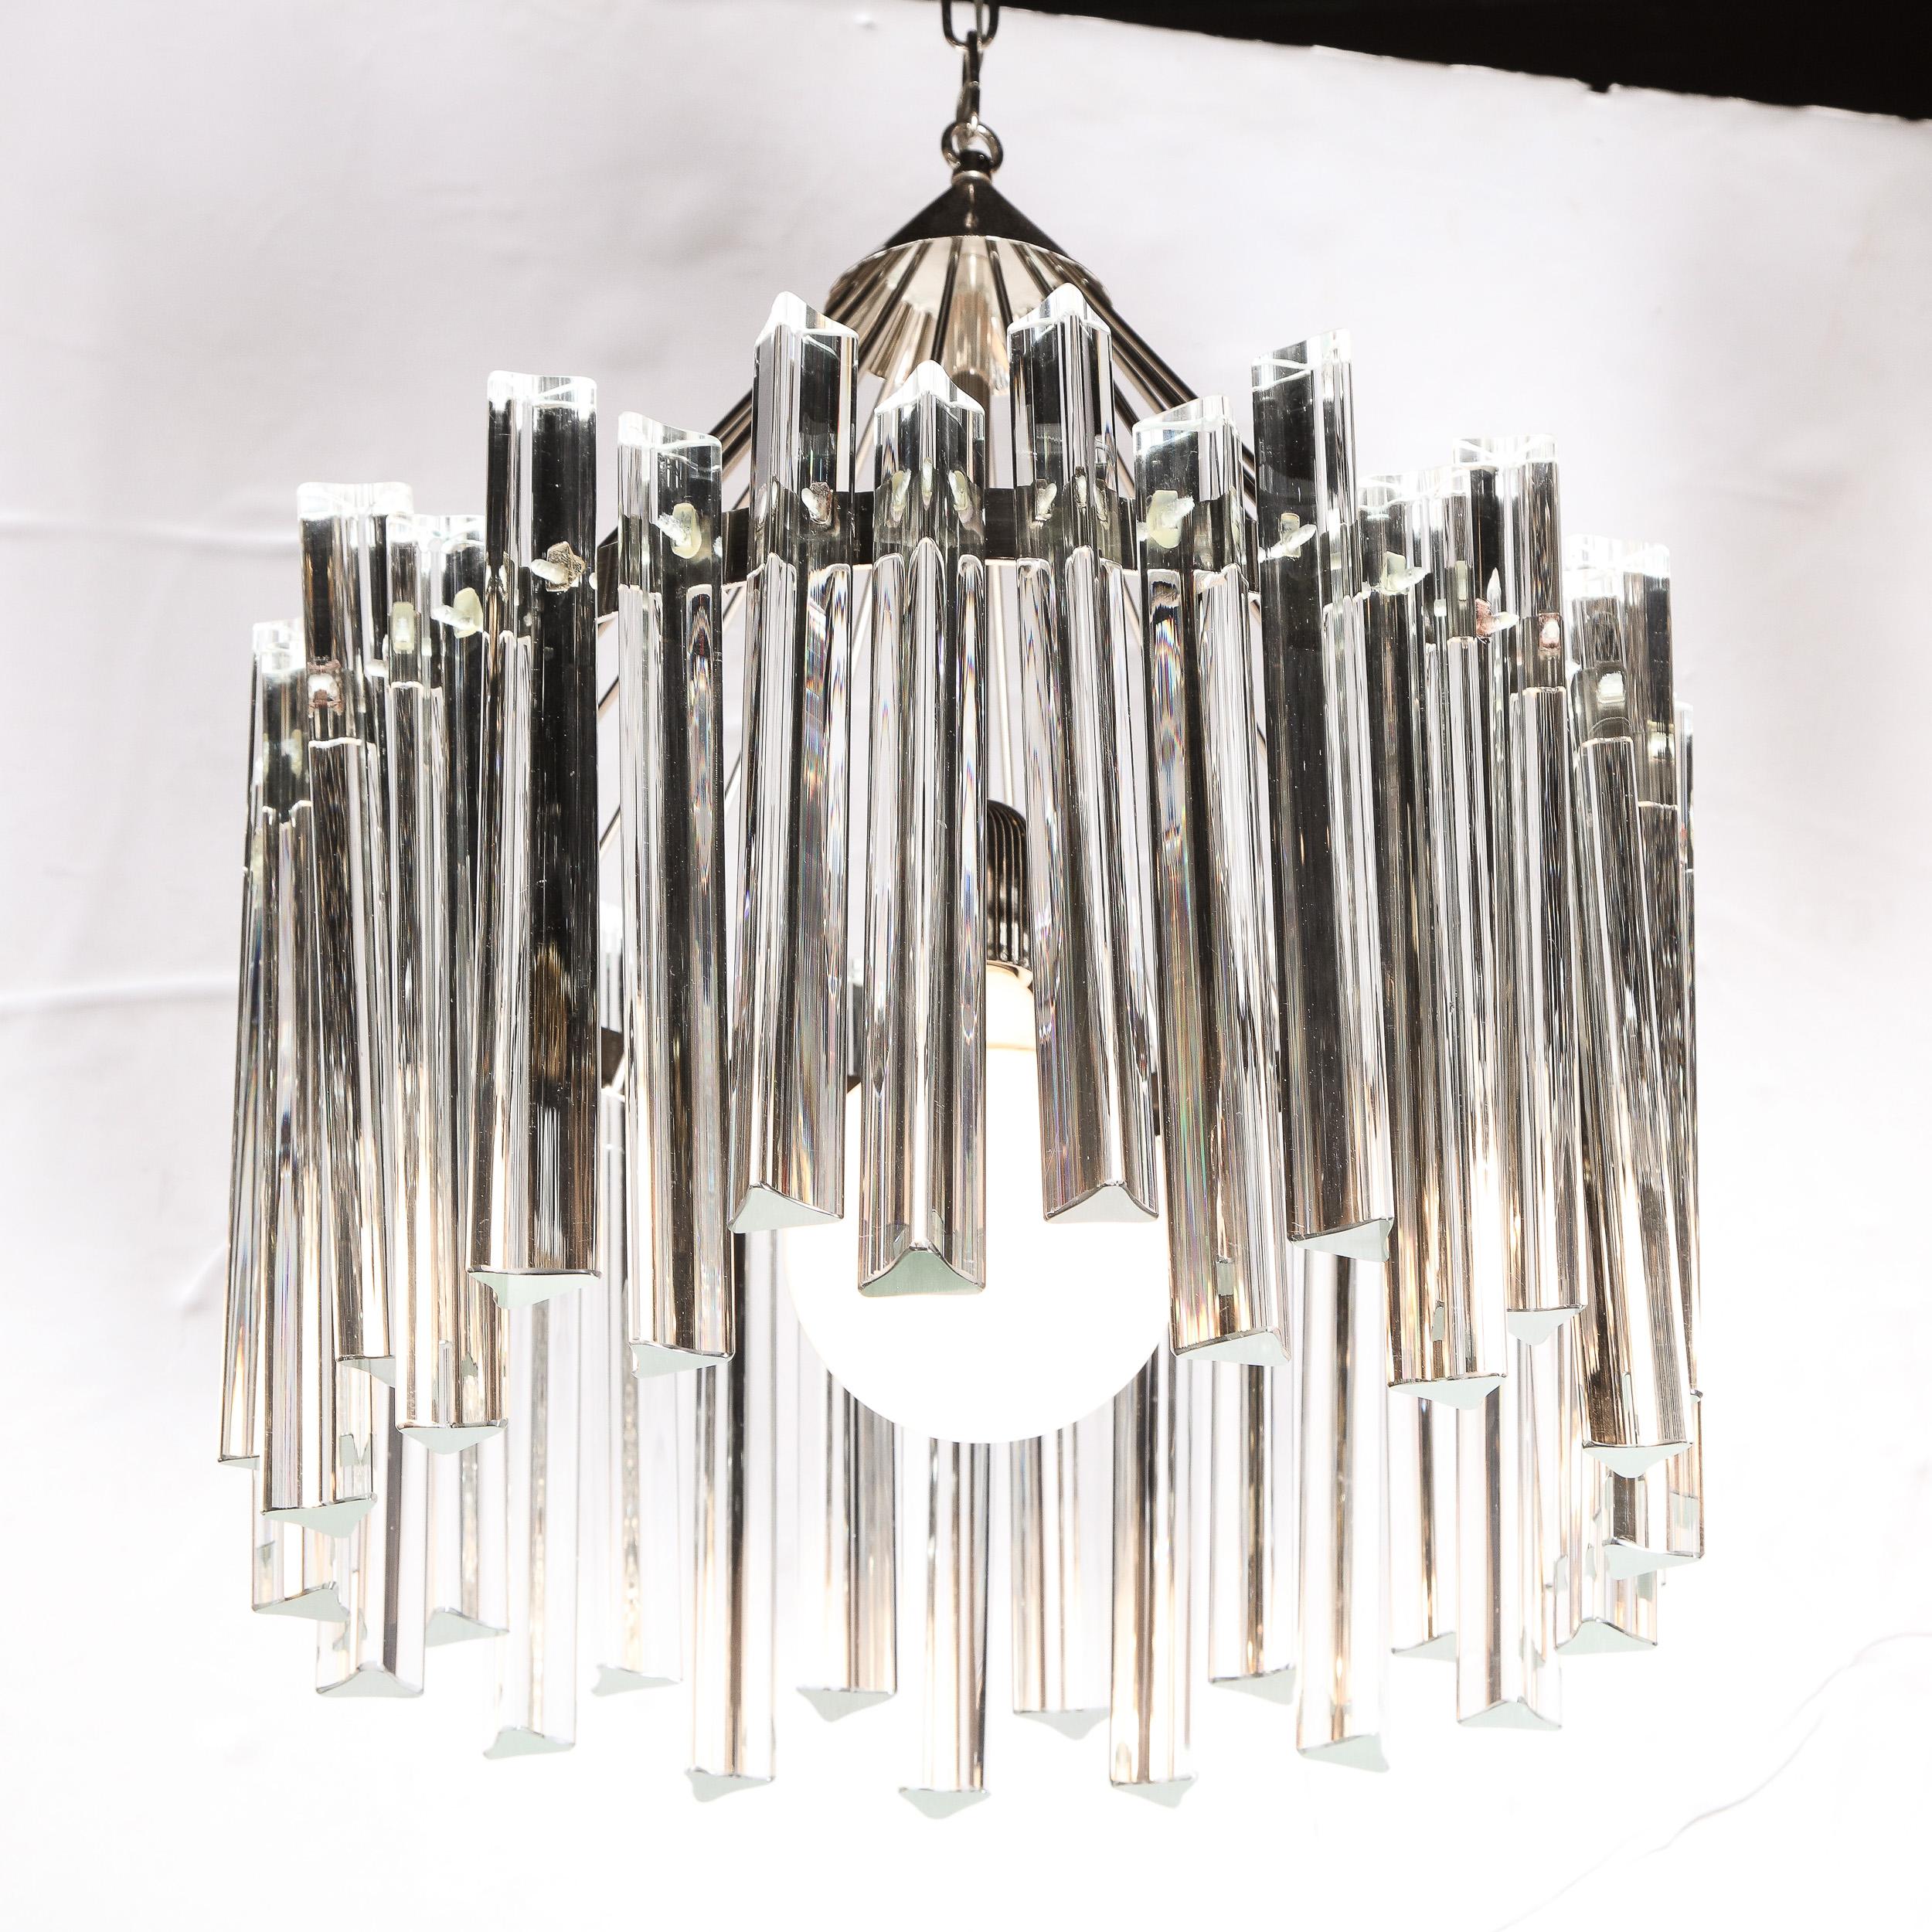 Italian Mid-Century Modern Polished Chrome & Translucent Murano Glass Triedre Chandelier For Sale